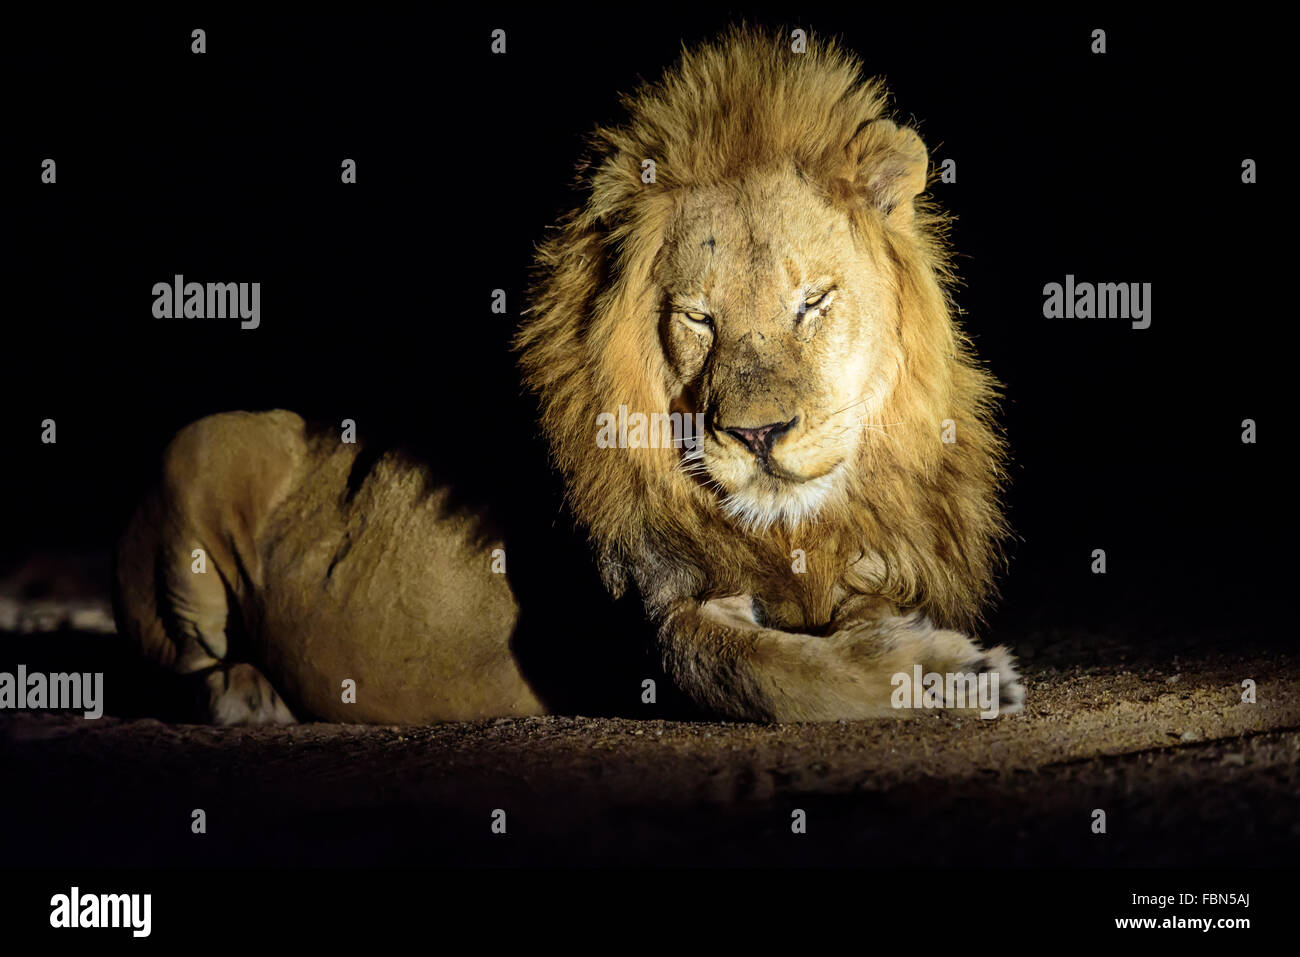 Magnificent male lion at night Stock Photo